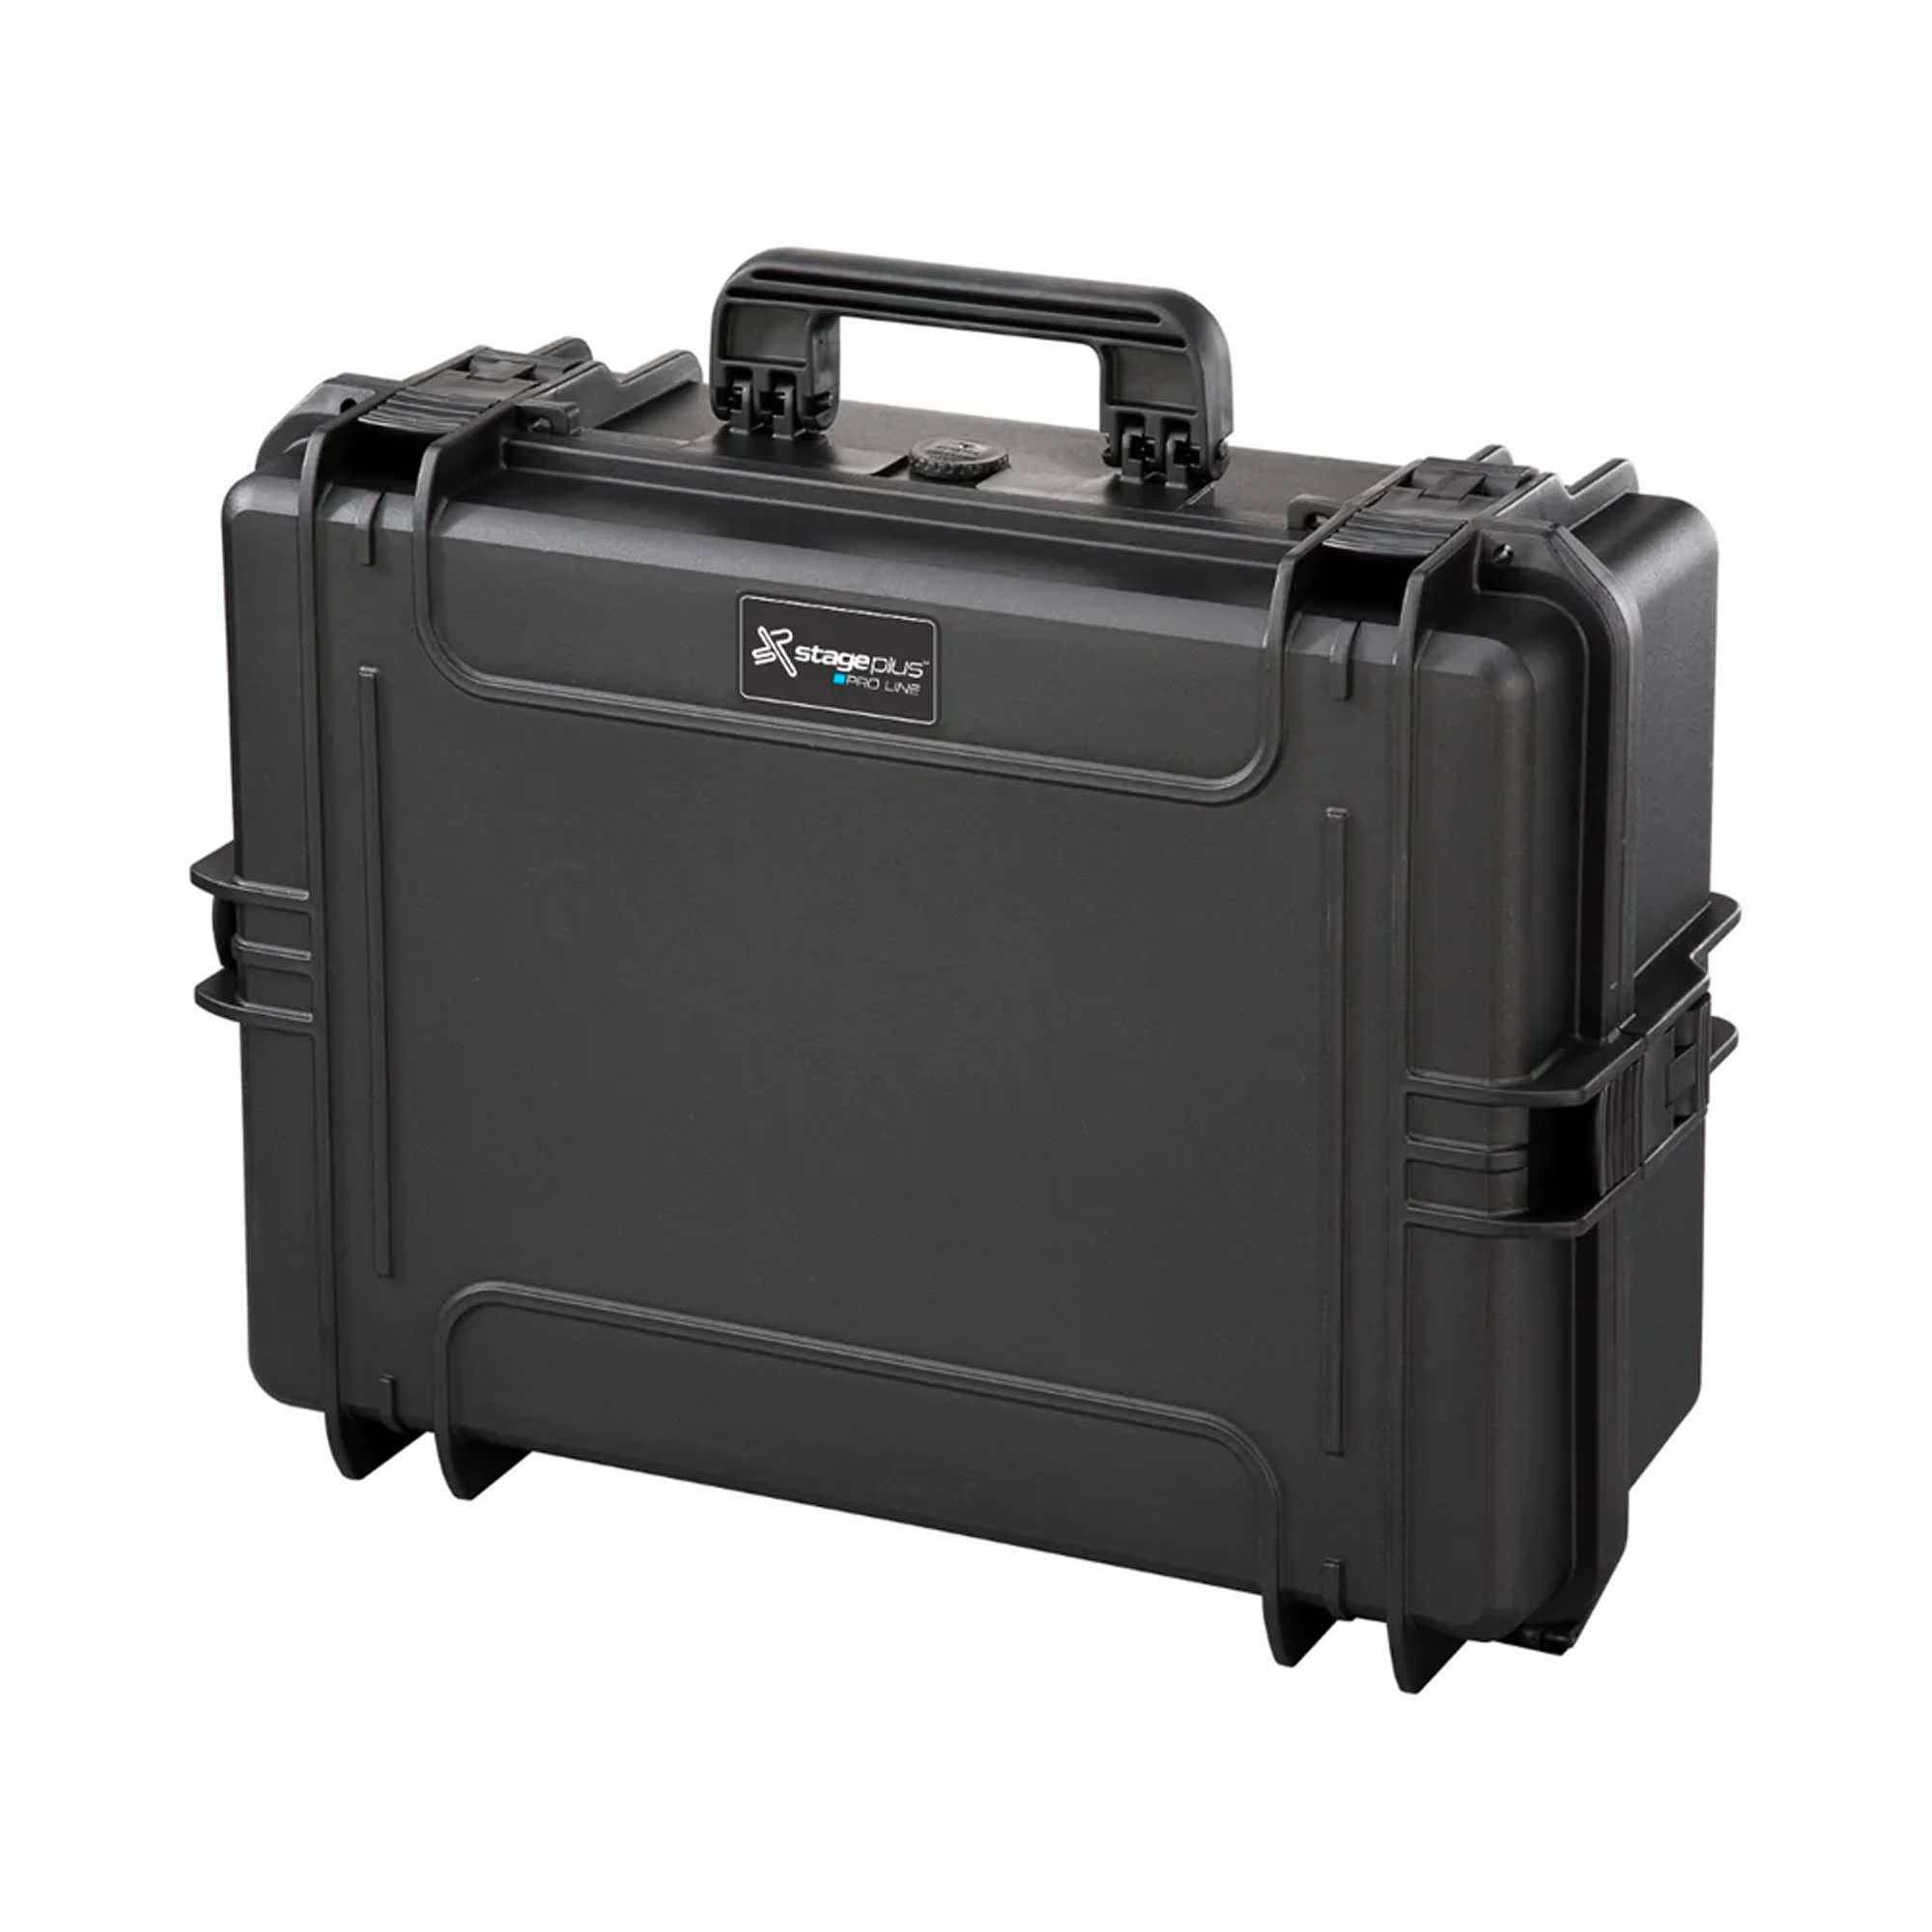 Stage Plus PRO 505TC Black Carry Case, Material Tool Inlay, ID: L500xW350xH194mm